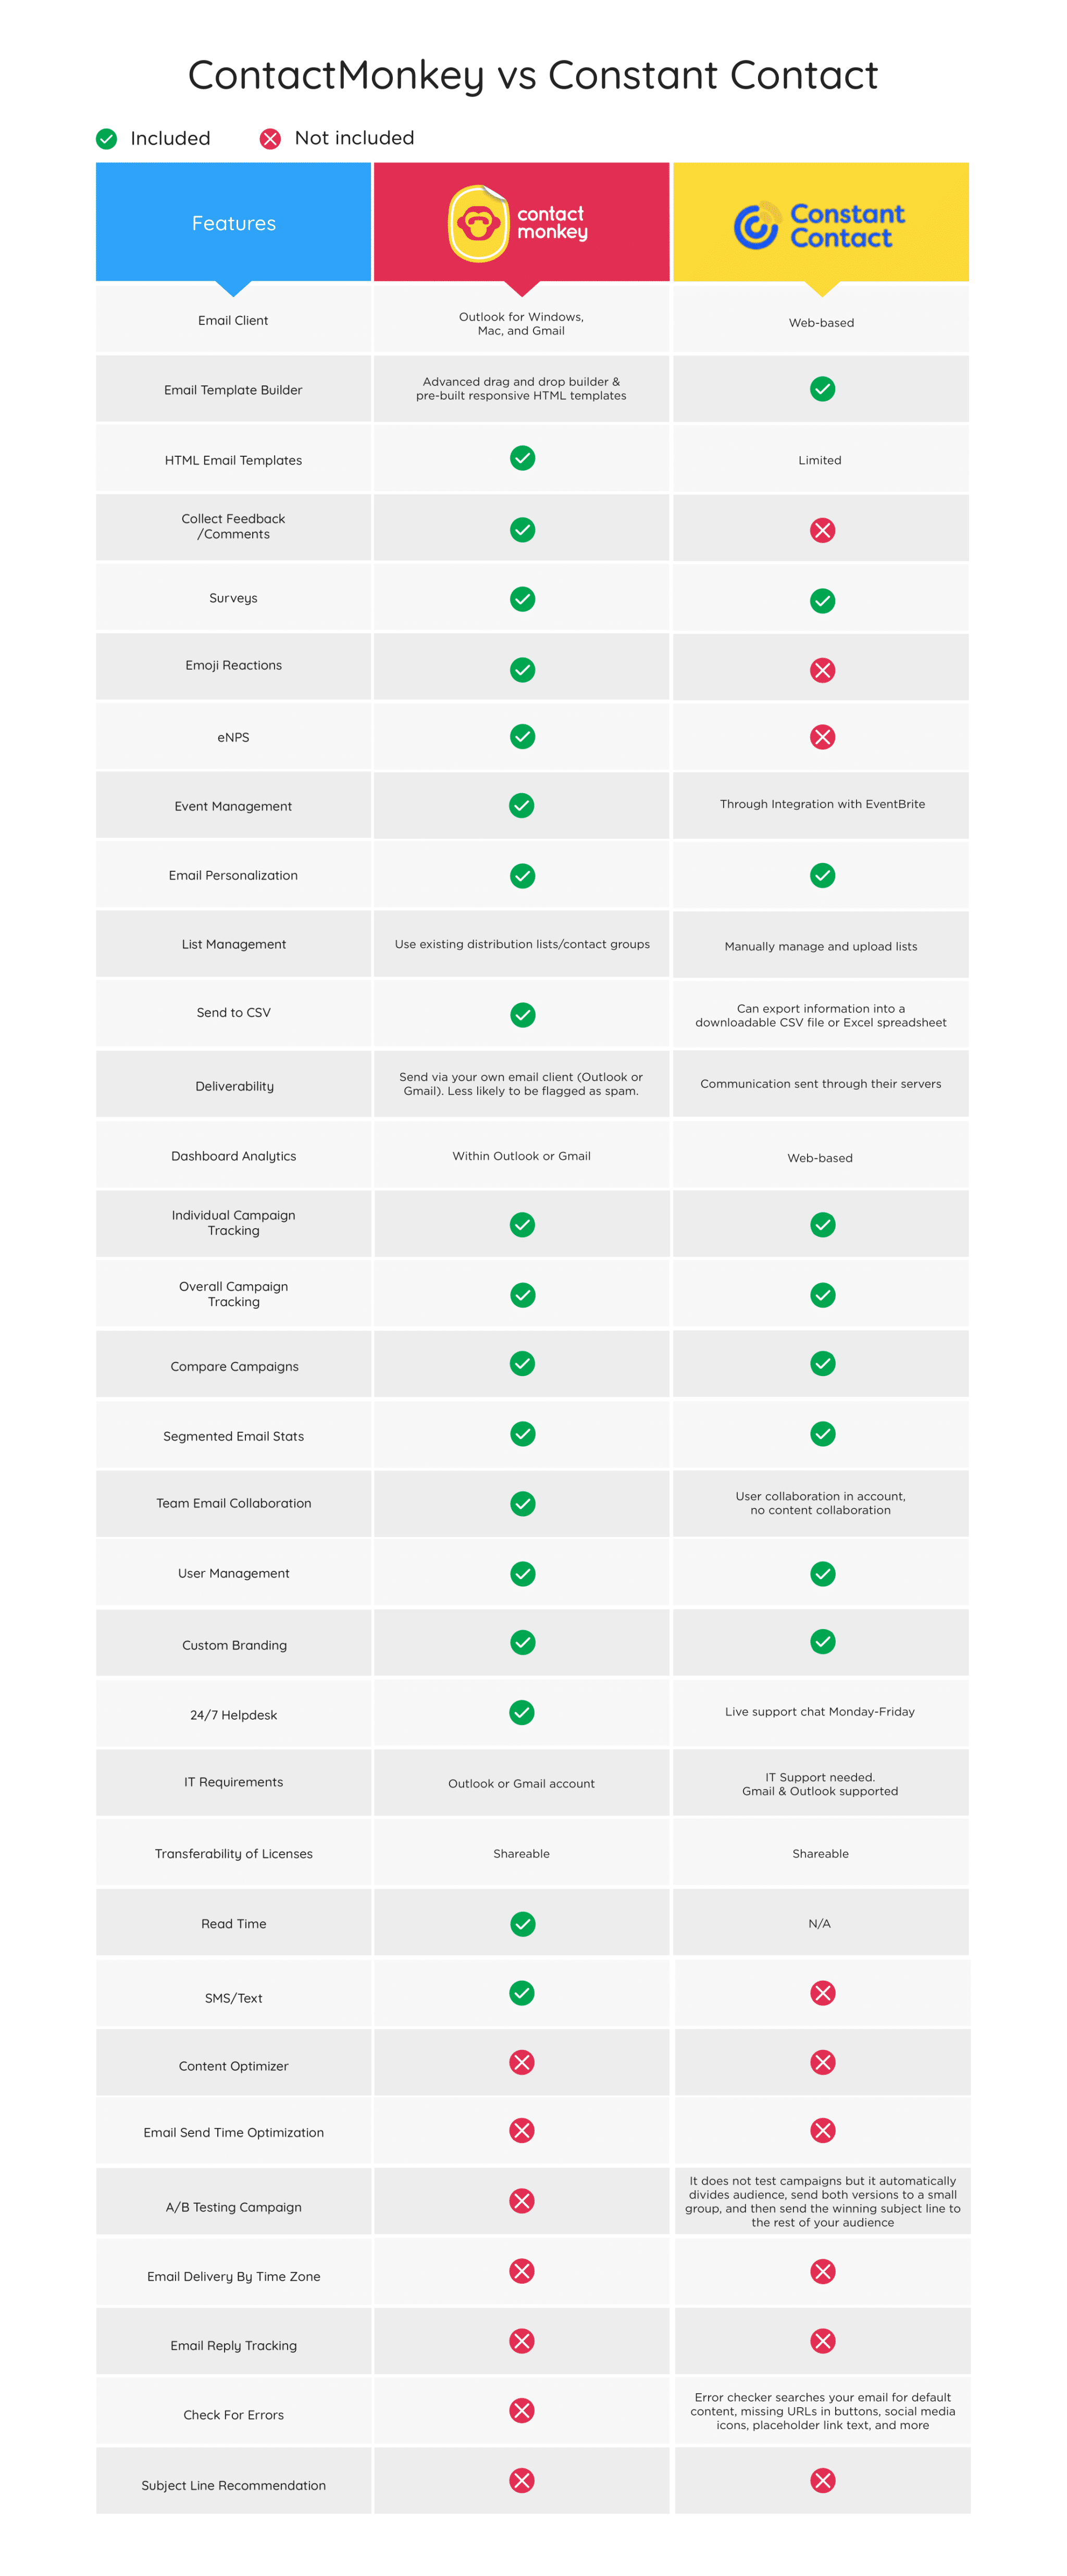 Image of comparison chart between ContactMonkey and Constant Contact.